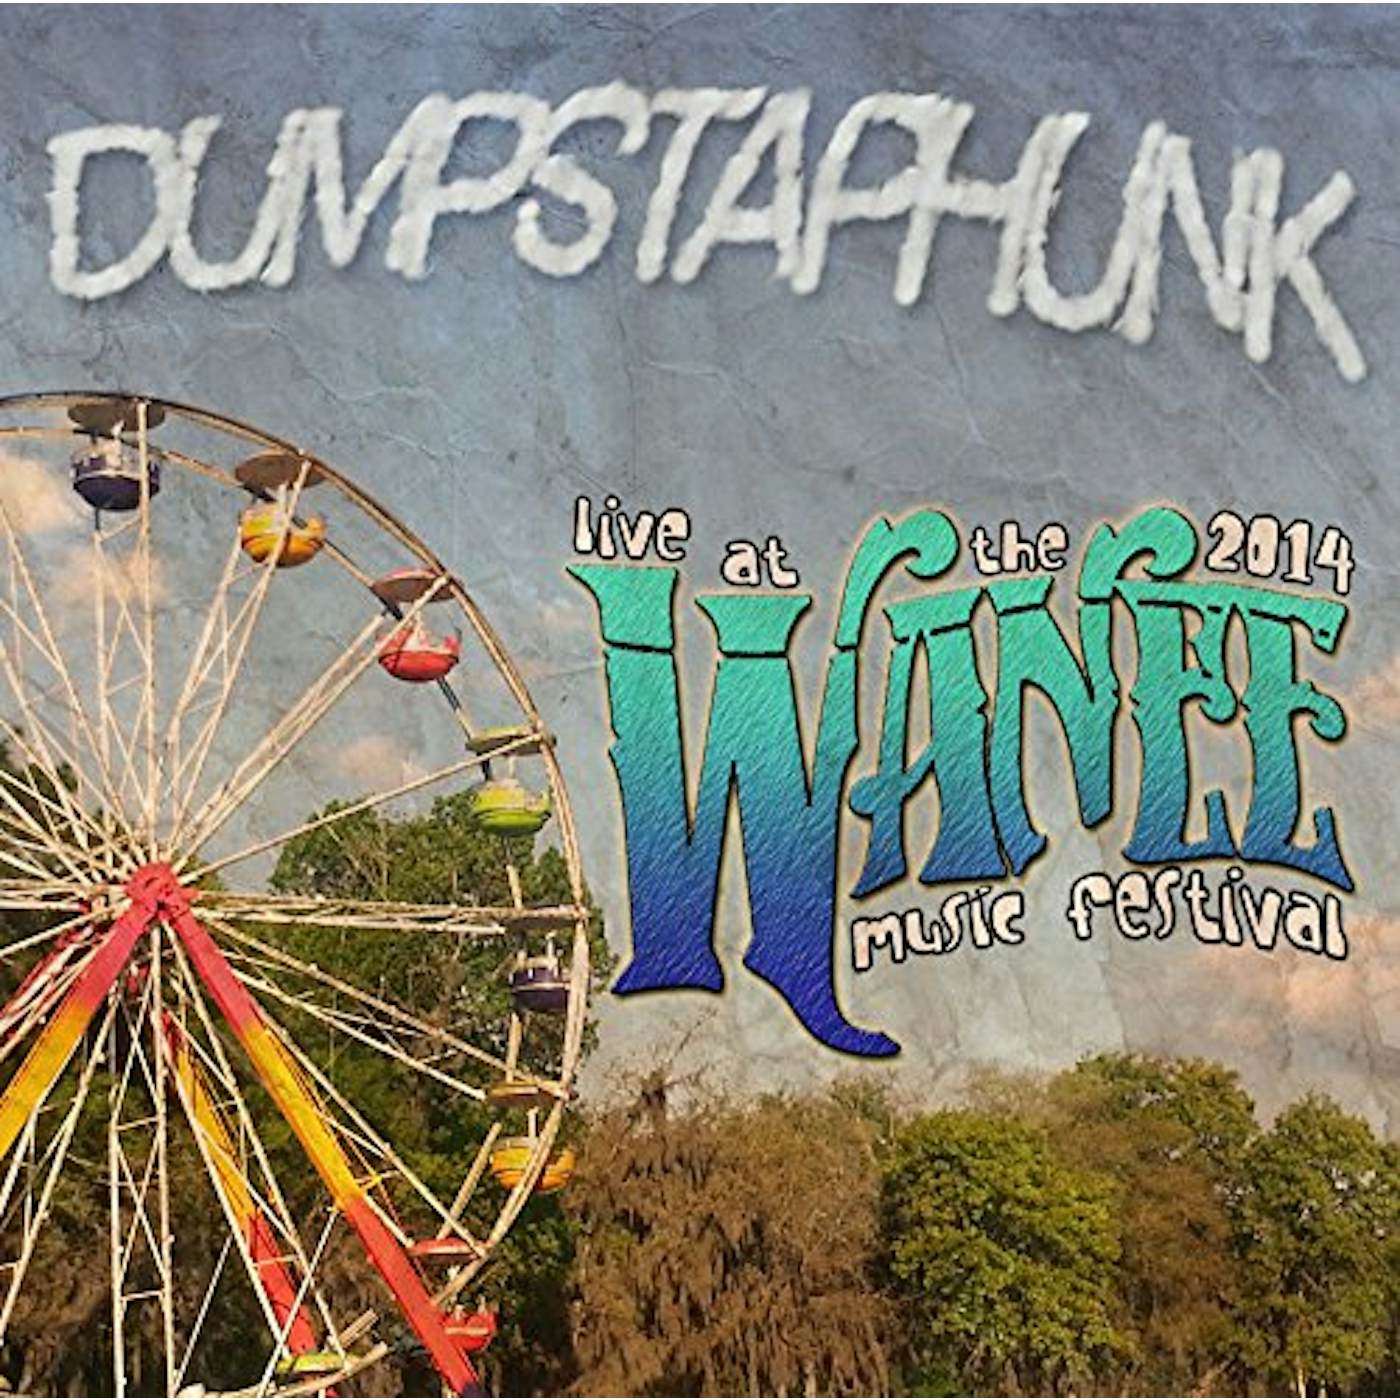 Dumpstaphunk COVERS LED ZEPPELIN LIVE AT WANEE 2014 CD